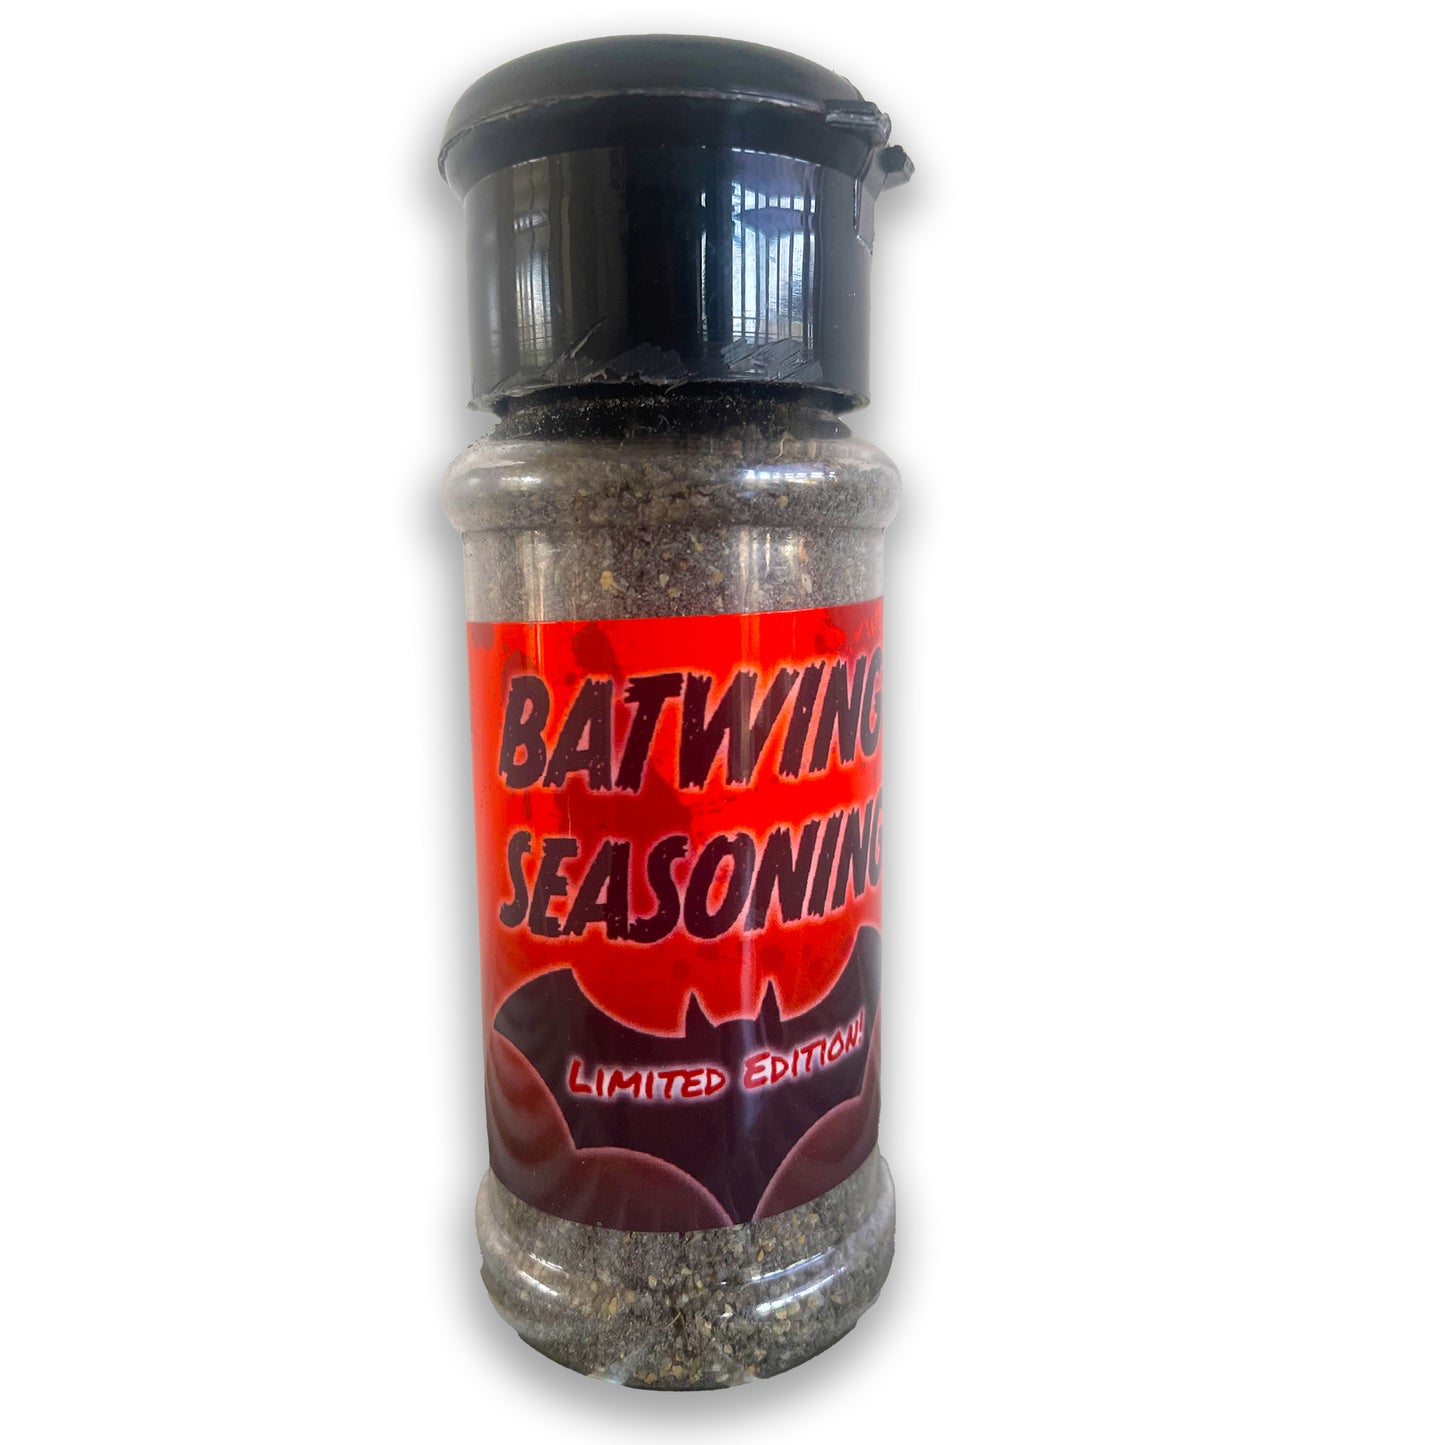 Limited Edition "Batwing" Seasoning - Halloween Special